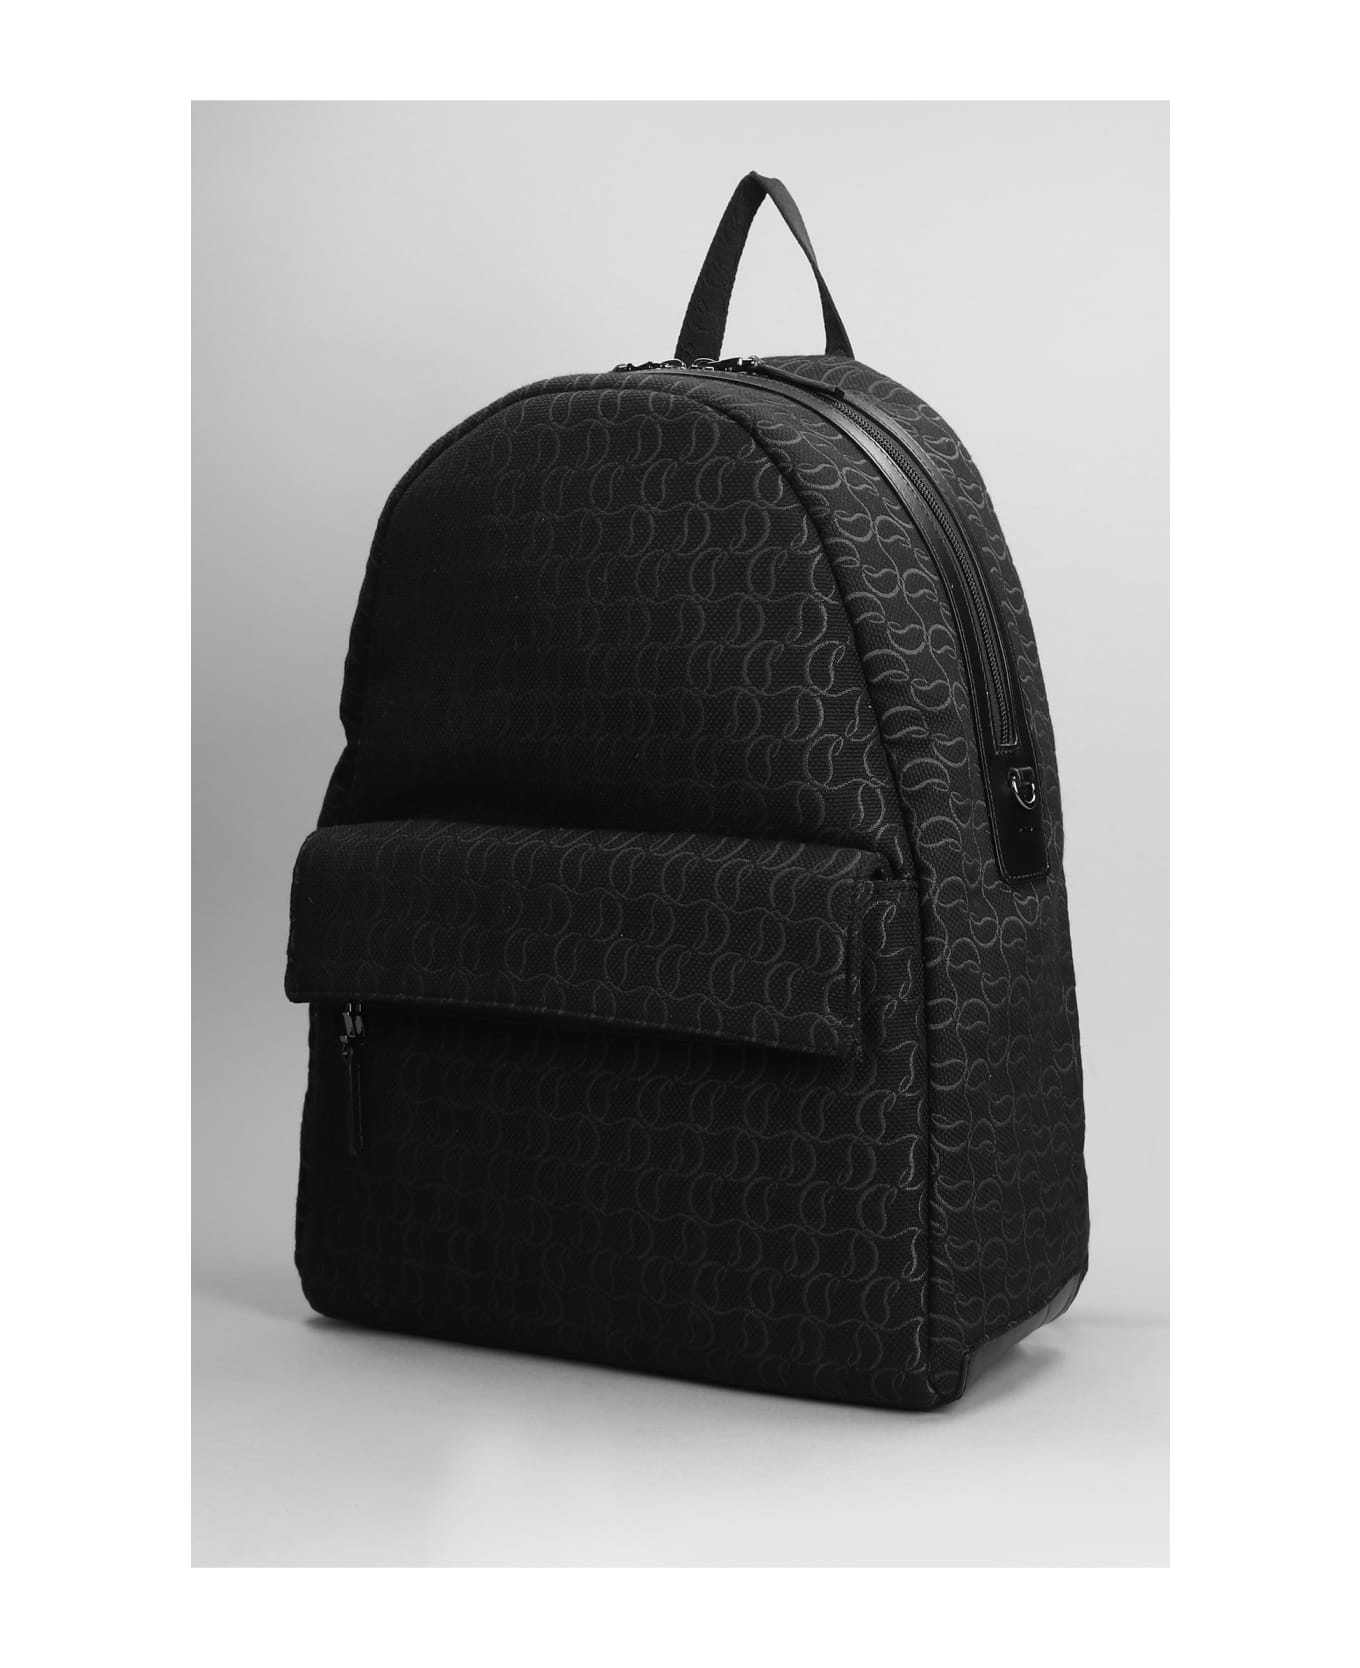 Christian Louboutin Zip N Flap Backpack In Black Cotton - black バックパック